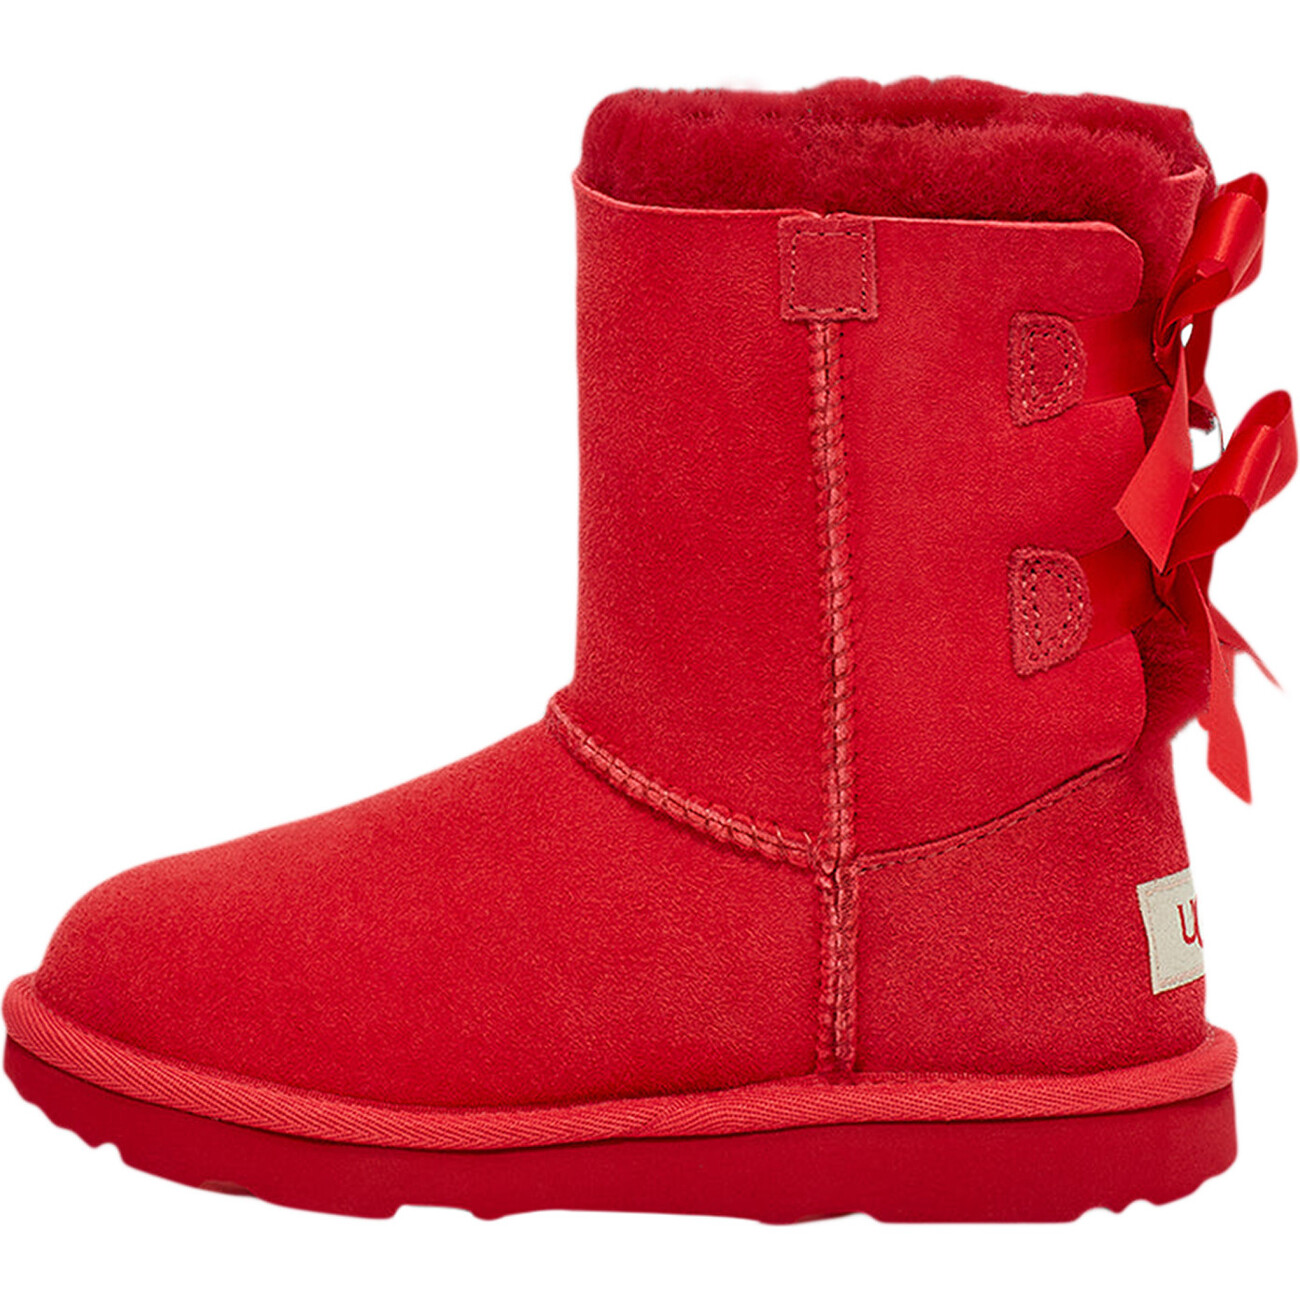 Bailey Bow Winter Boots, Red - UGG Shoes | Maisonette